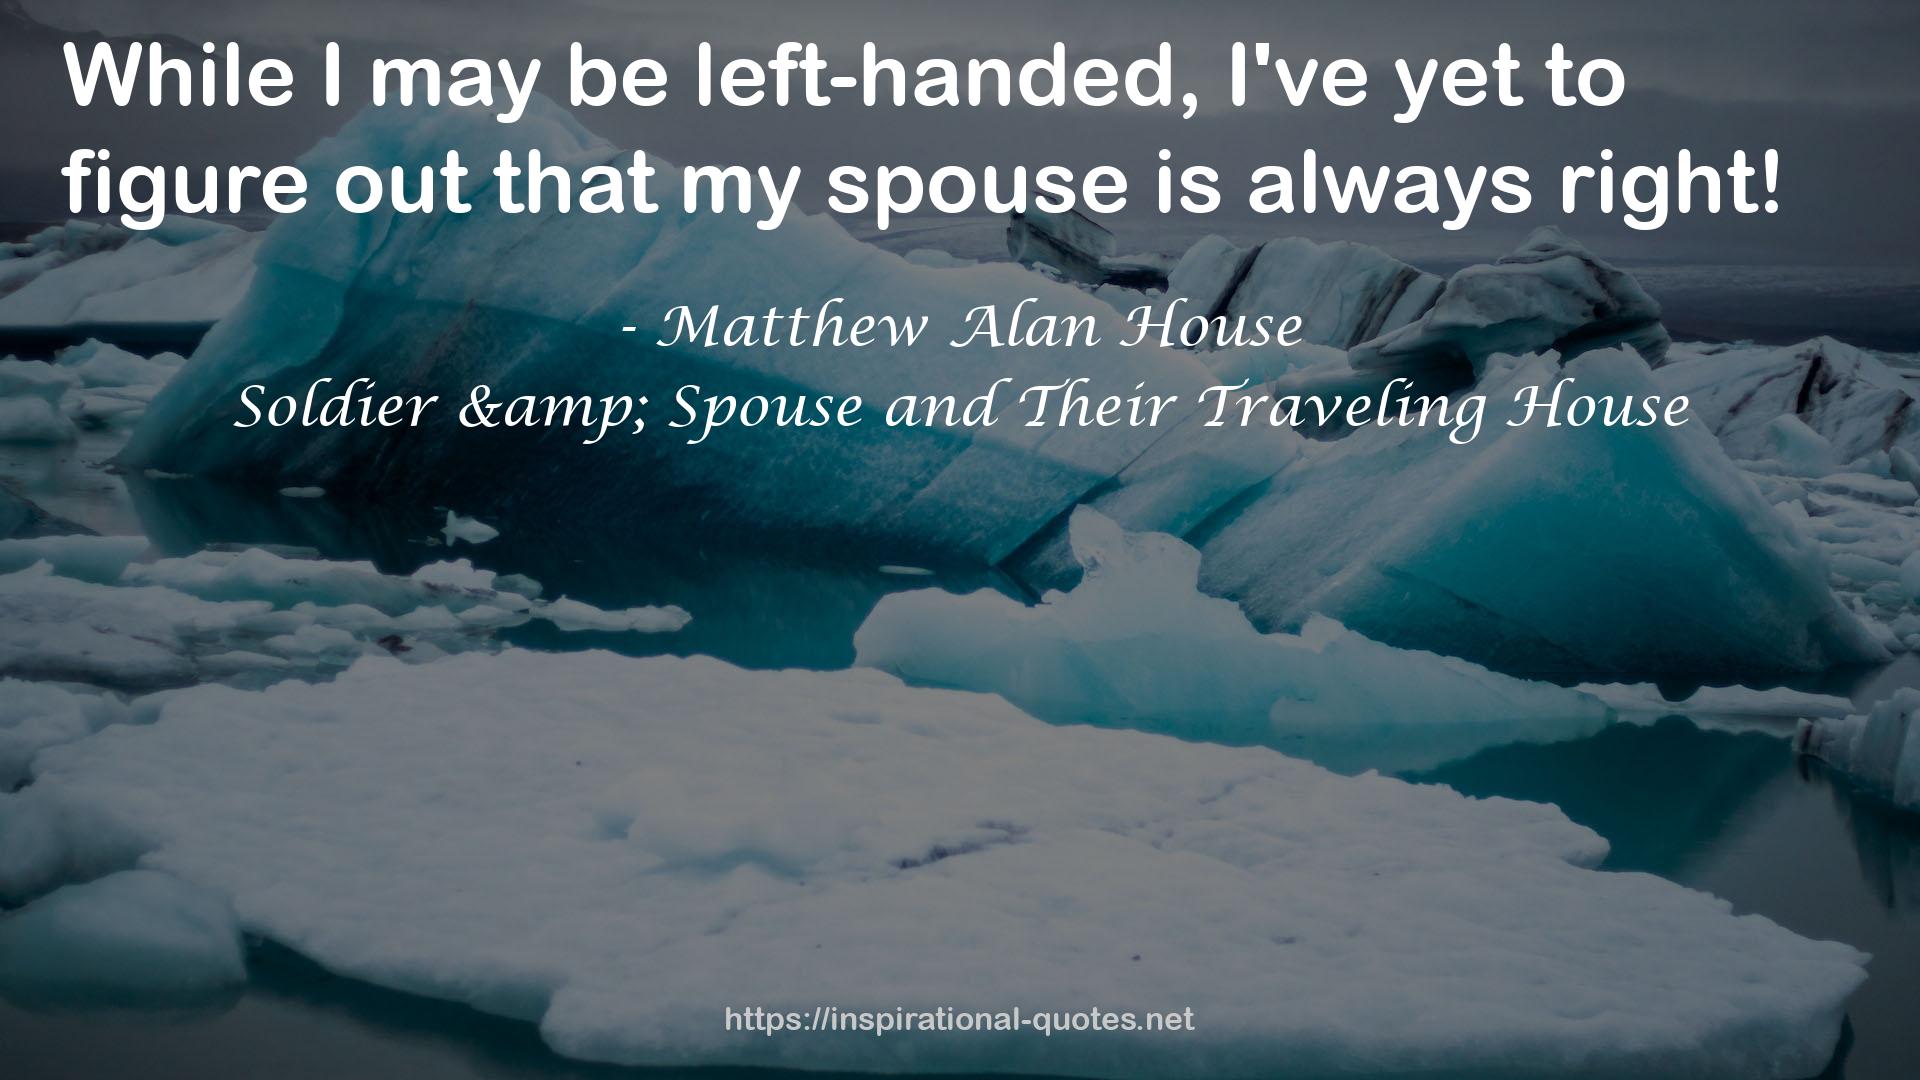 Soldier & Spouse and Their Traveling House QUOTES